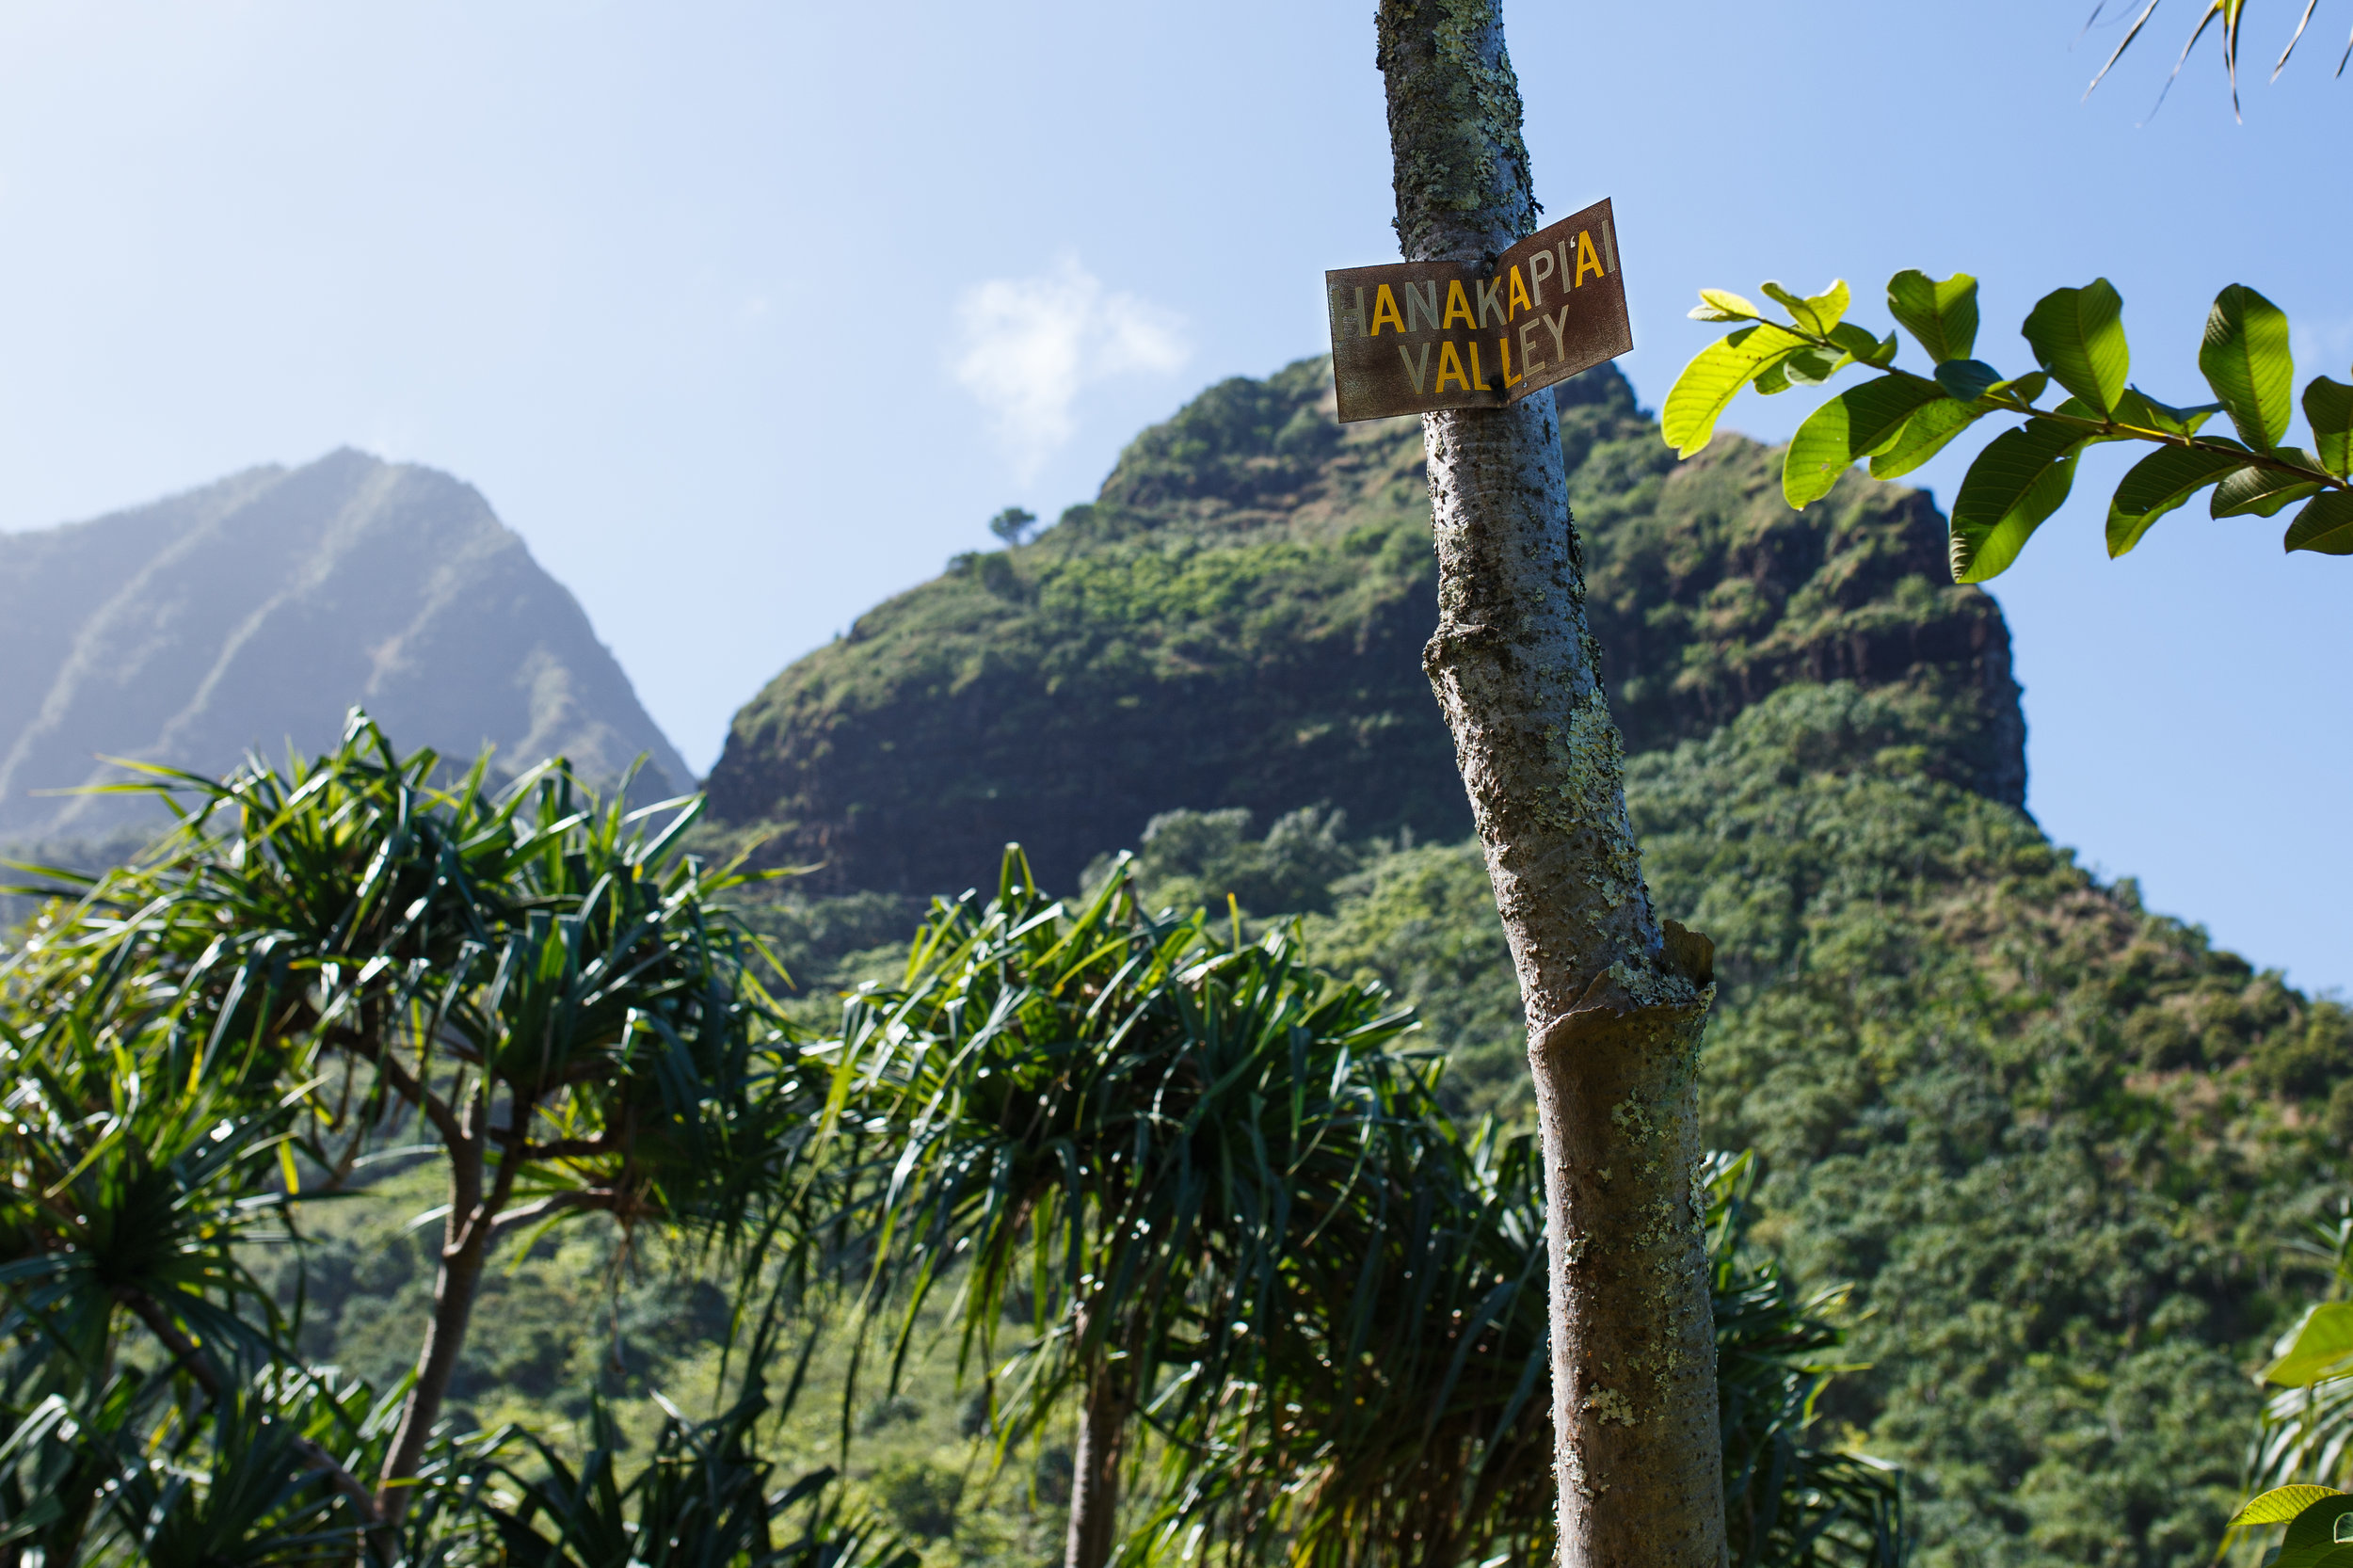  2 miles into the Kalalau Trail, you’ll be welcomed by this sign to the entrance of Hanakapi’ai Valley. 